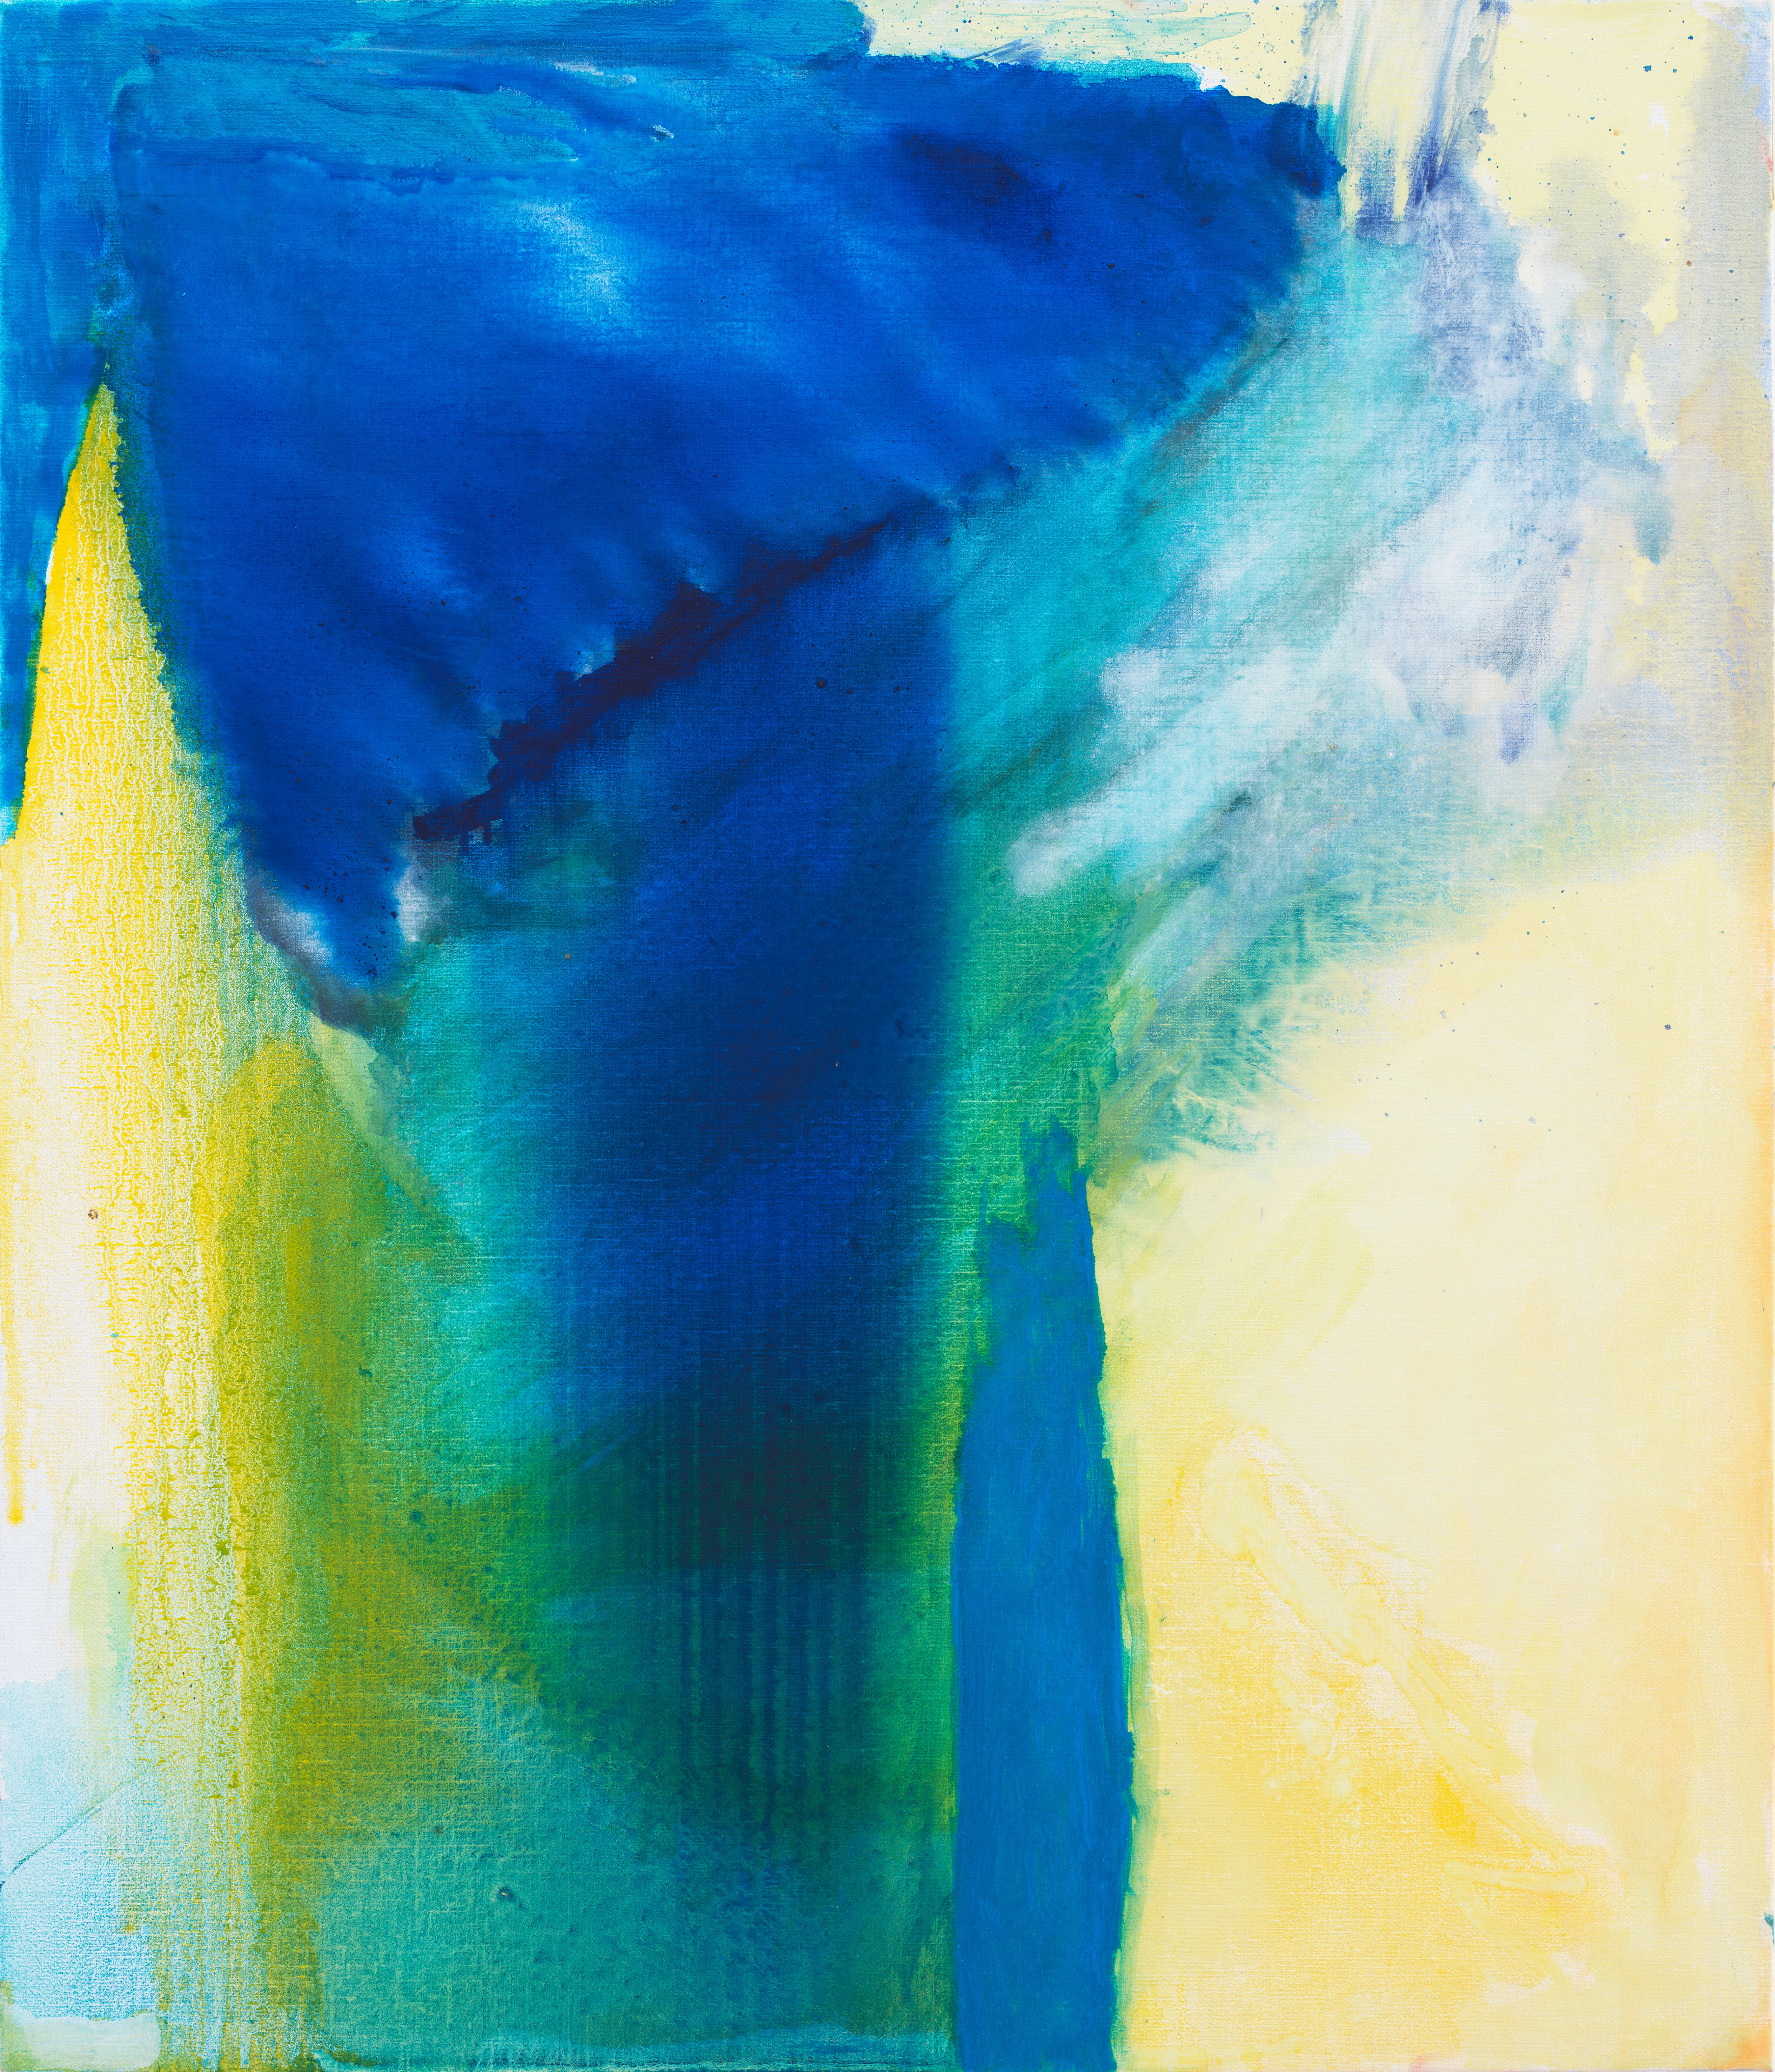 Abstract oil painting with a light yellow background and a large, deep blue patch at the upper left corner. The blue patch is brushed downward towards the bottom, blending with the yellow and creating a blue-green wash of color in the center